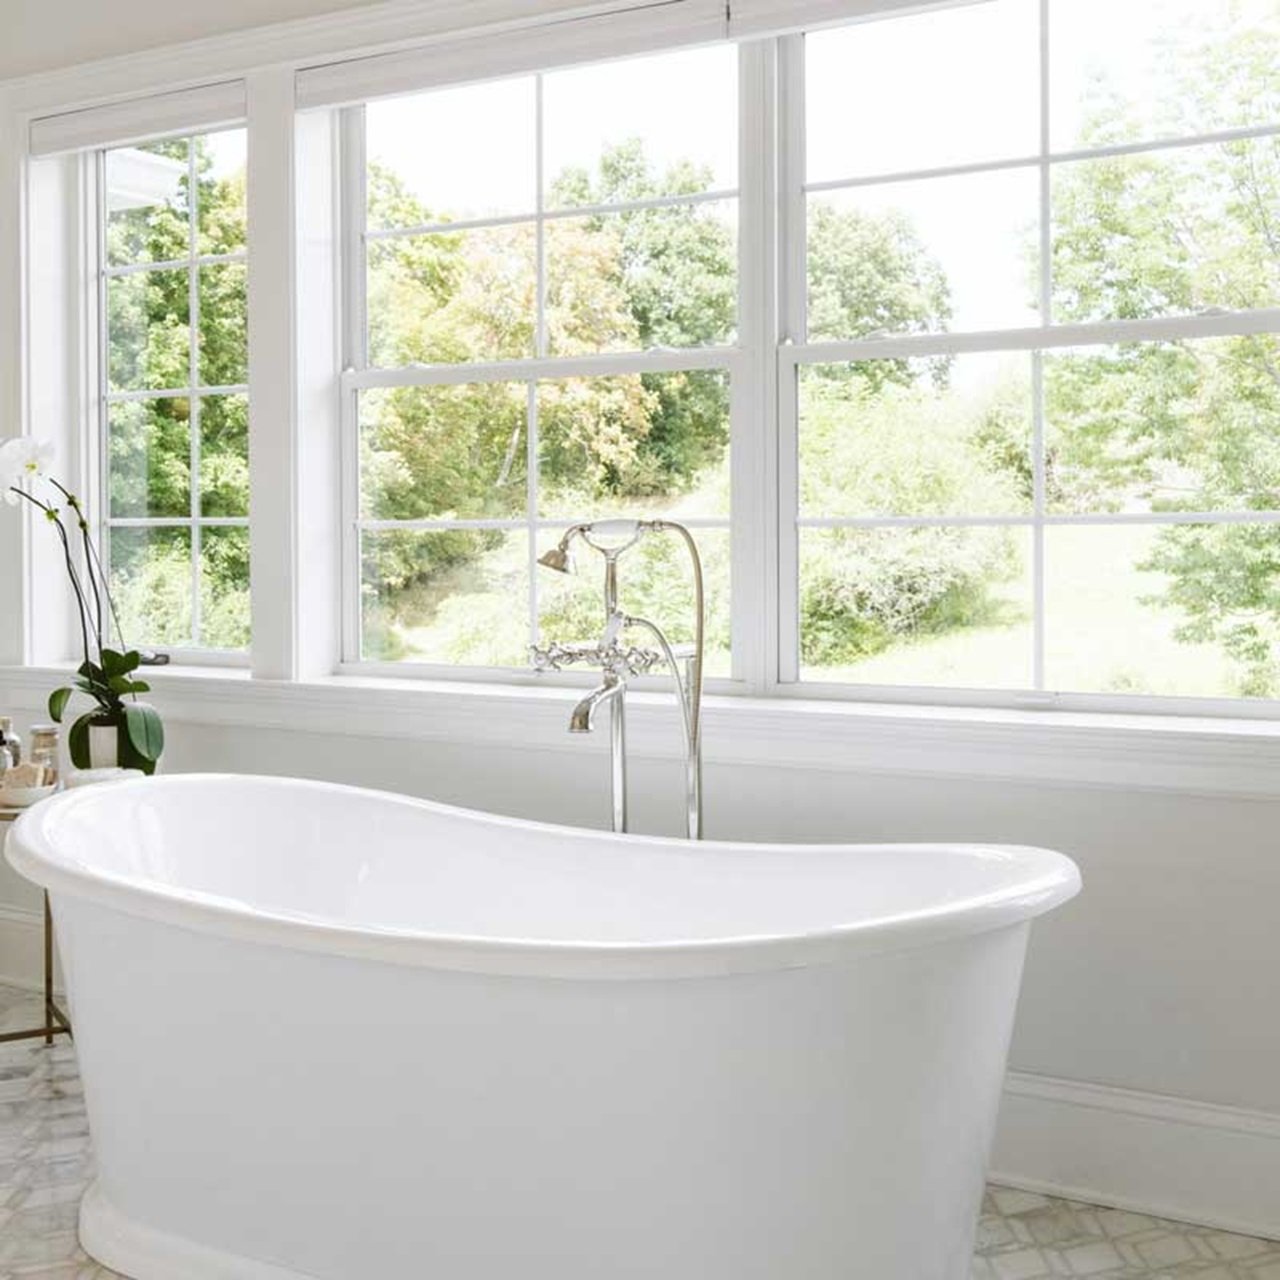 Bathroom with white free standing bathtub and double hung windows